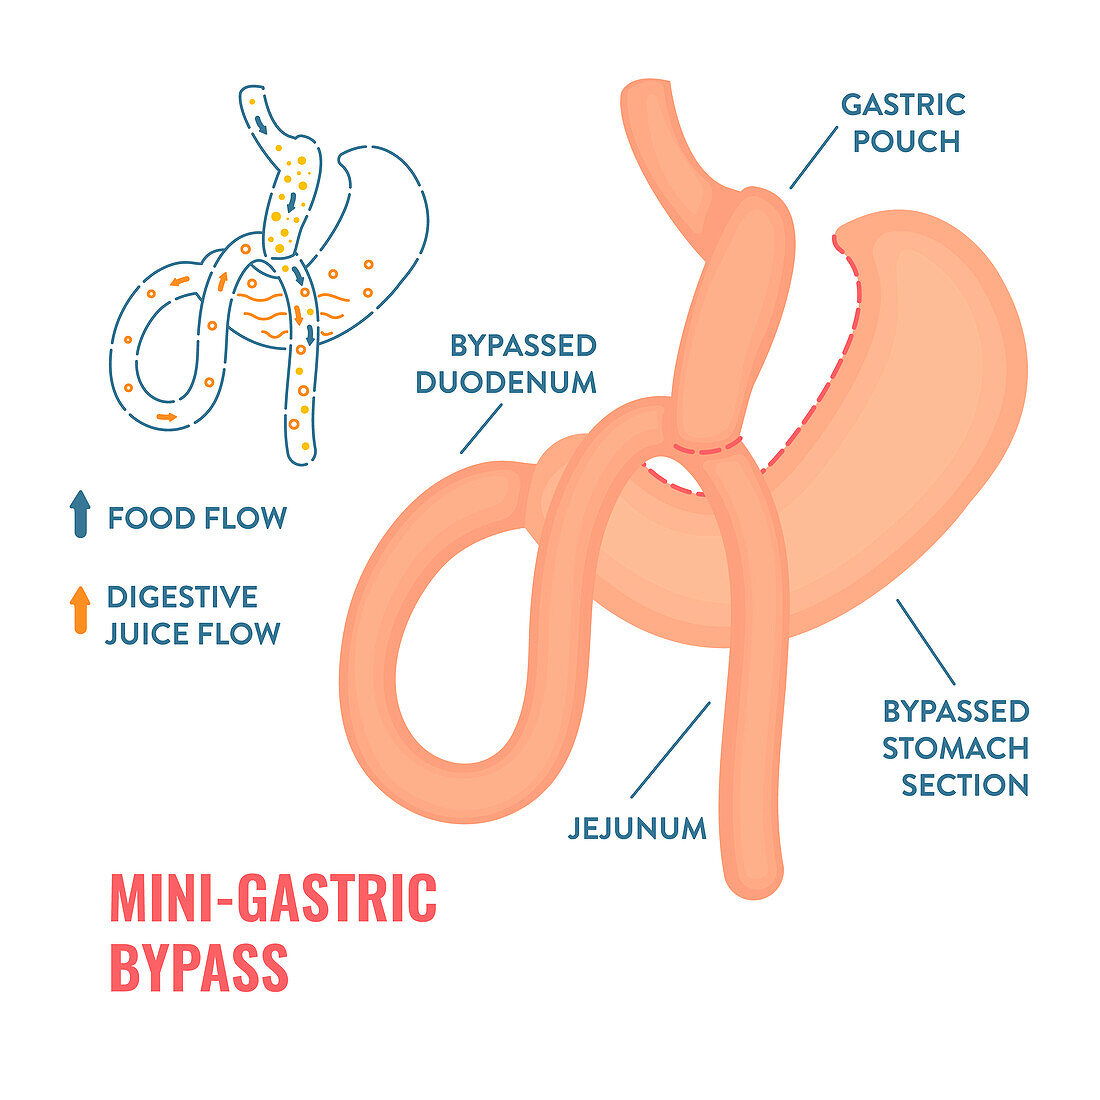 Mini gastric bypass bariatric surgery, illustration